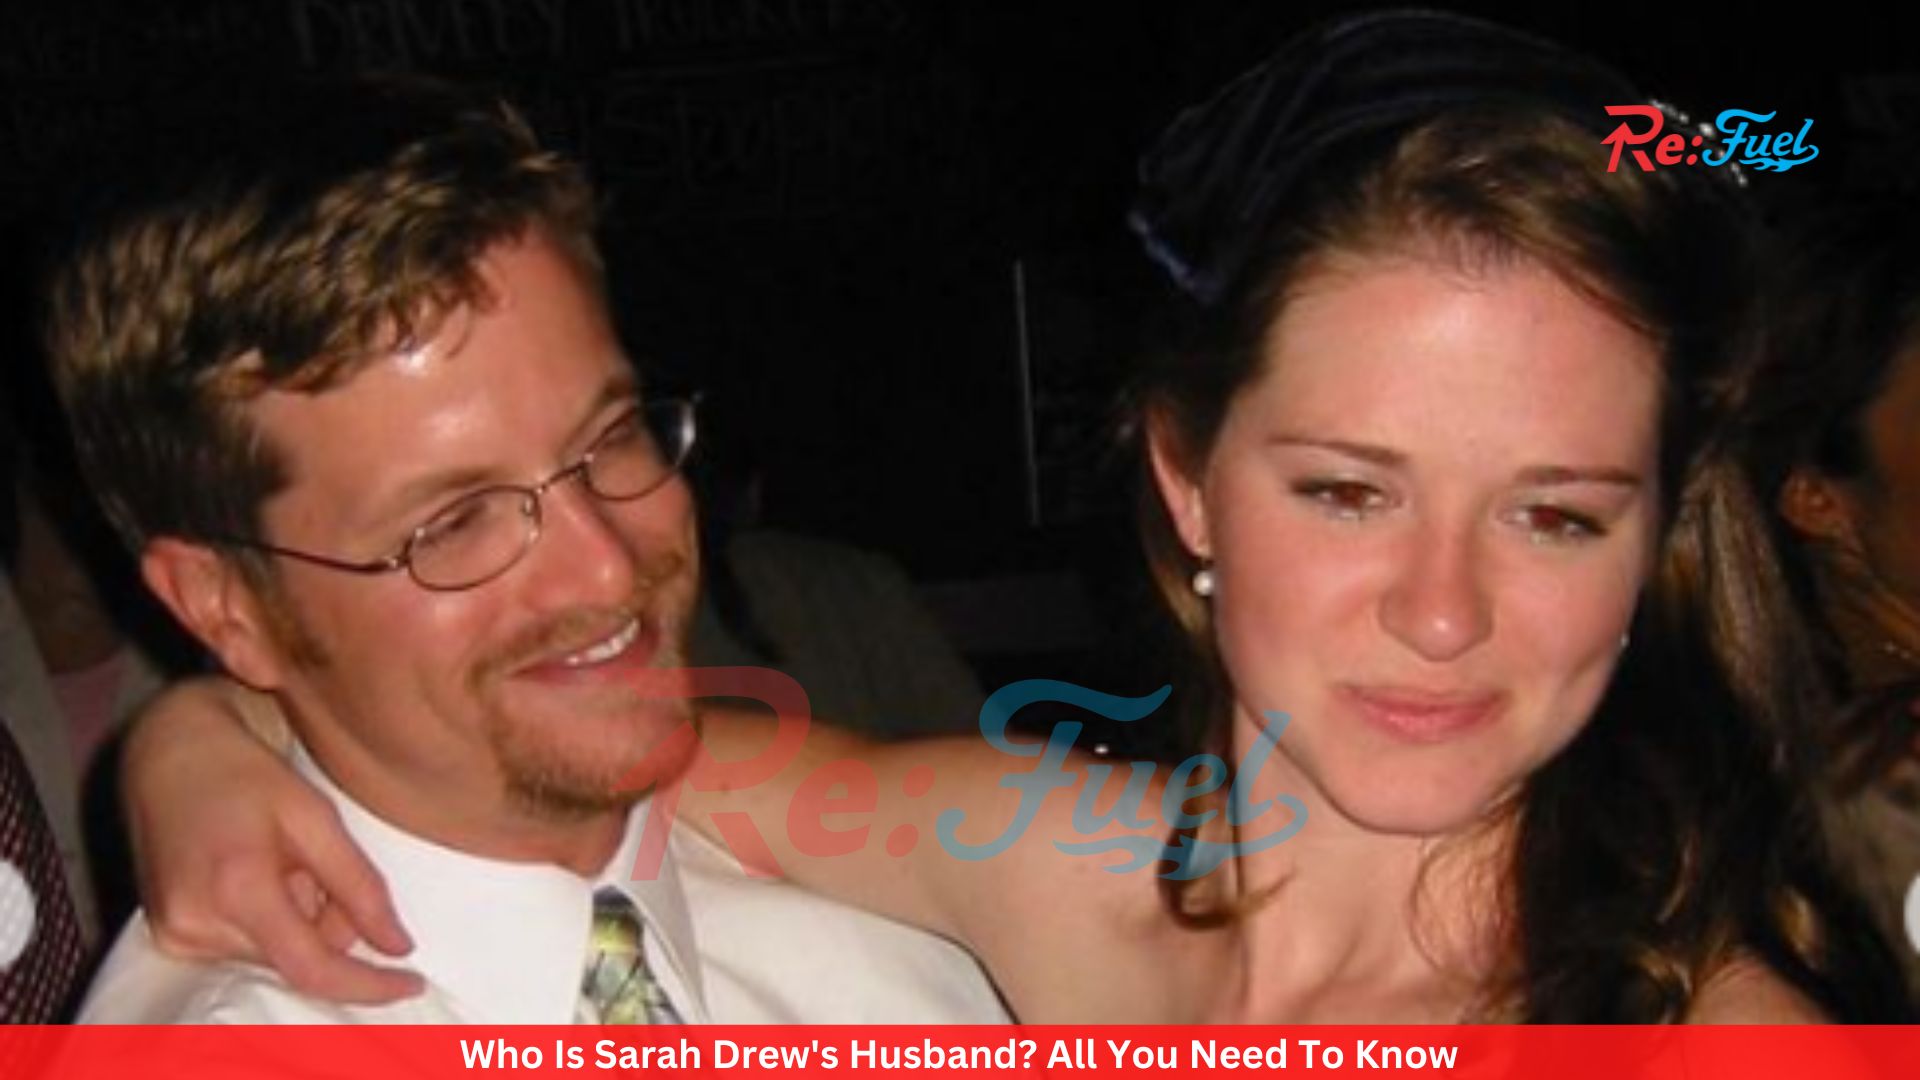 Who Is Sarah Drew's Husband? All You Need To Know